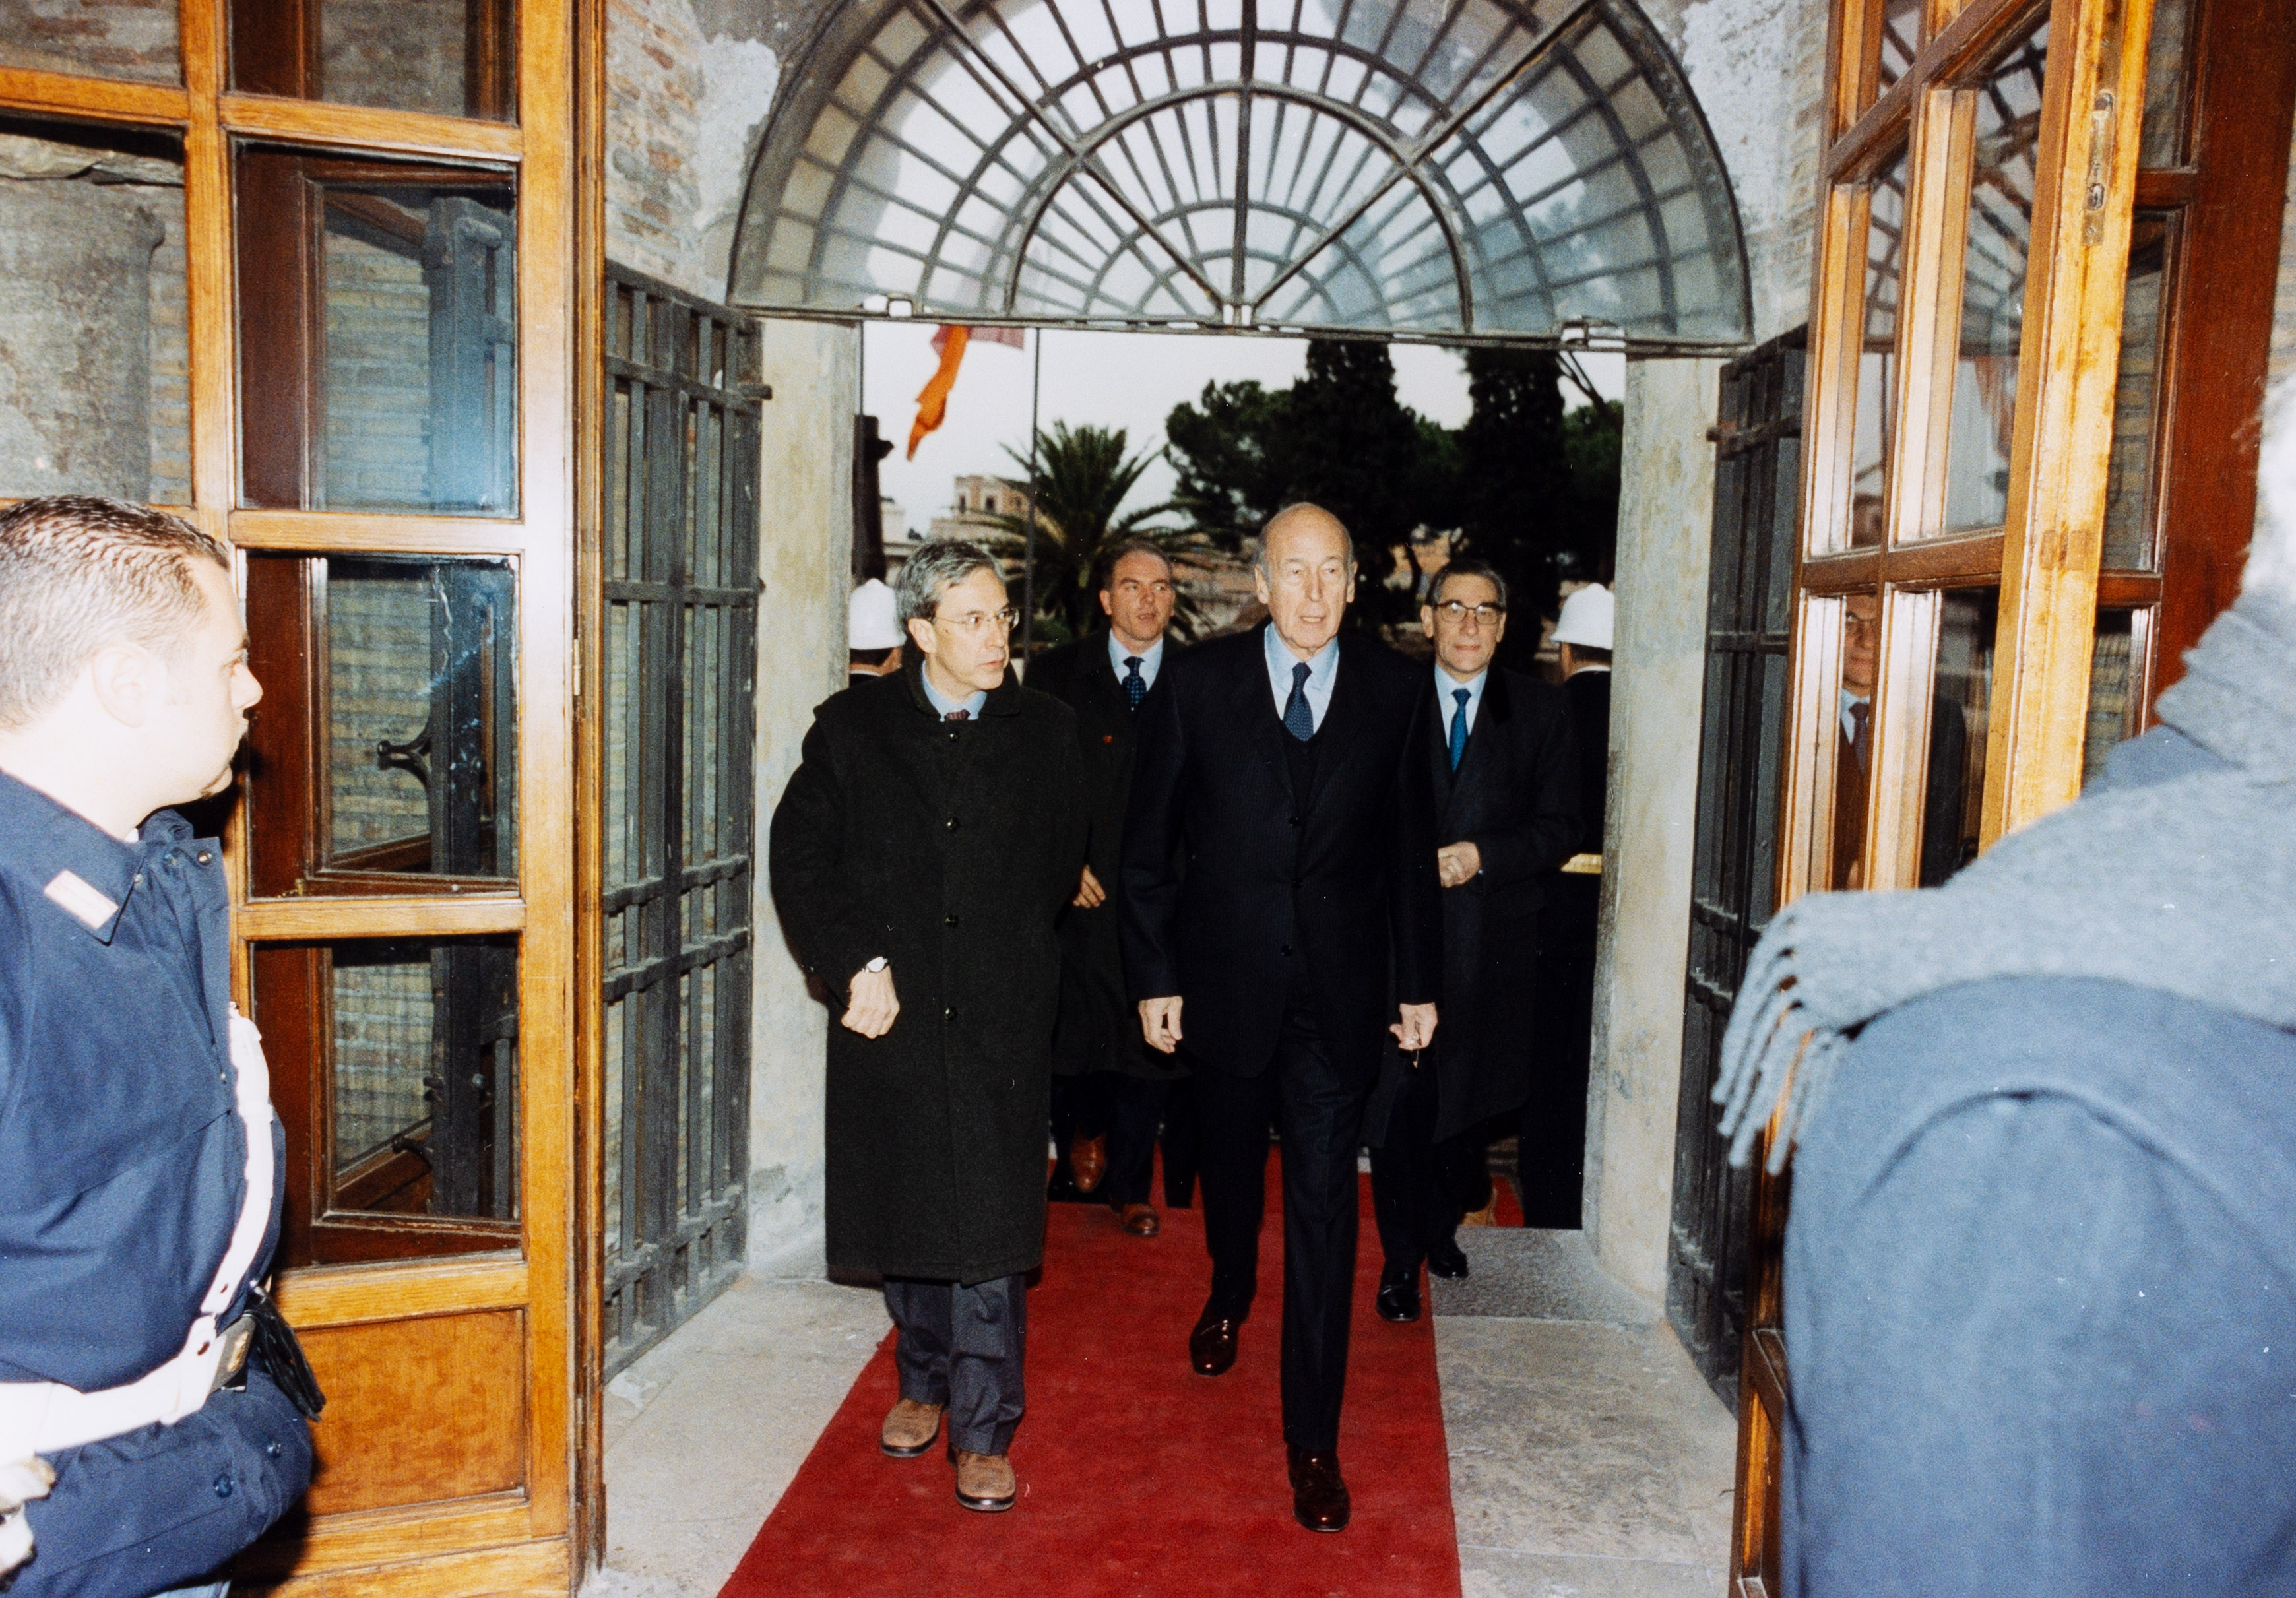 Valéry Giscard d´Estaing arriving to a meeting in Rome, Italy on 14 December 2001. HAEU, CCRE-829. Photo: Unknown.